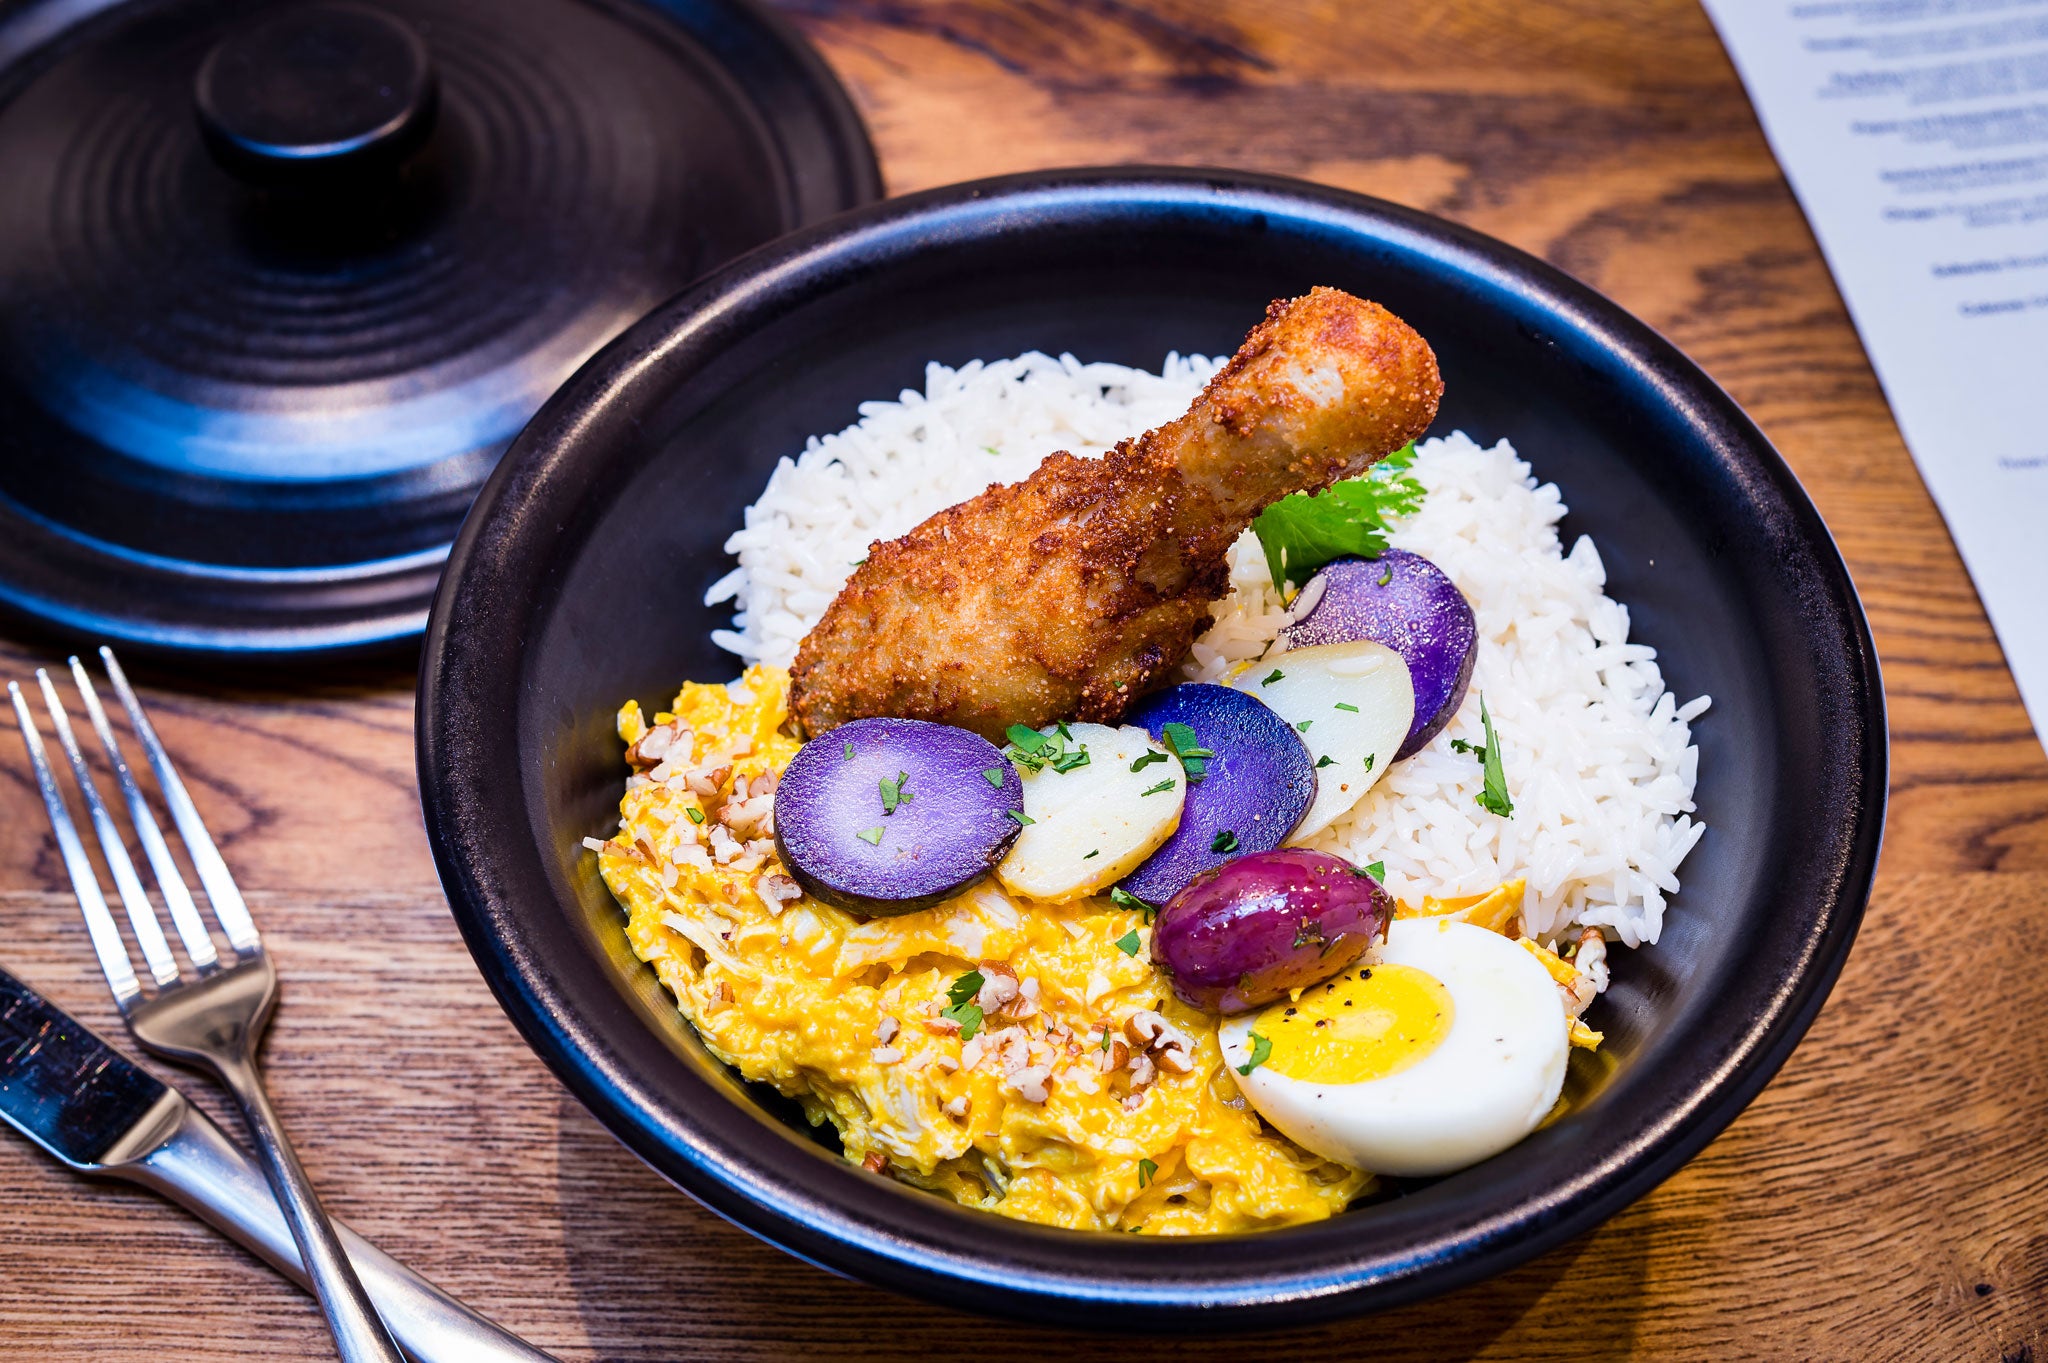 Traditional: Andina's aji de gallina is a chicken casserole that comes in a mildly spiced creamy sauce, and is served with rice, Peru's famous purple potatoes, and a quinoa-coated drumstick